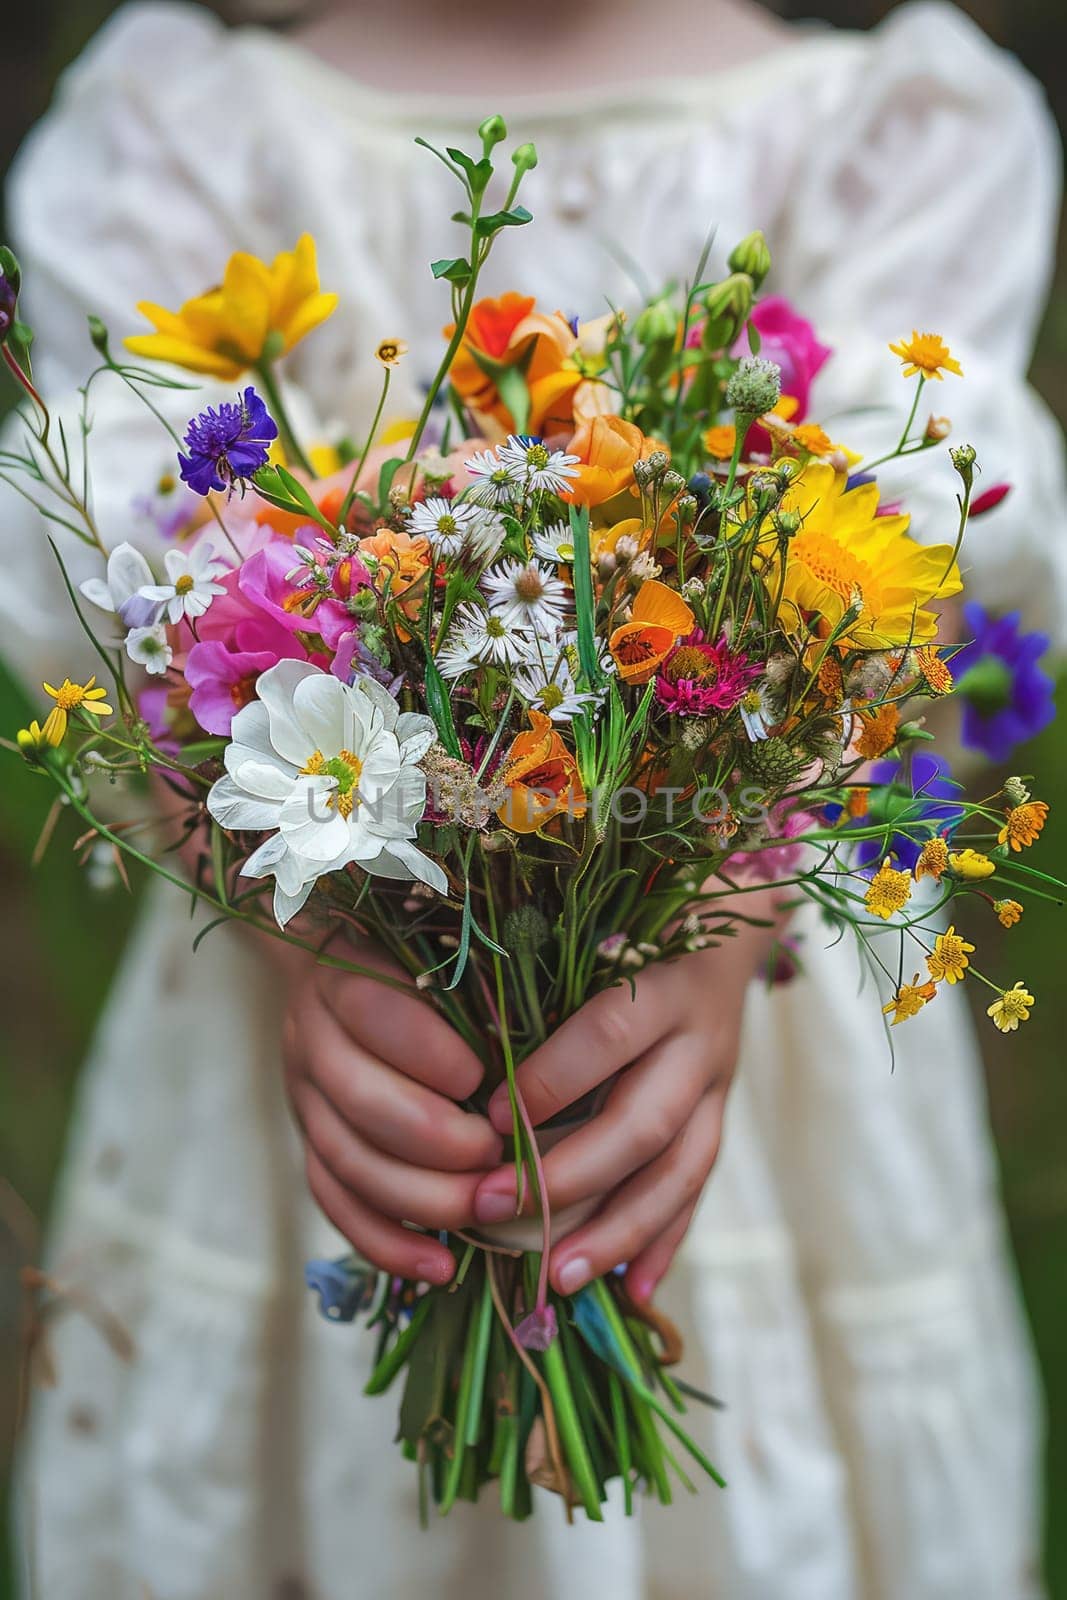 Child with a bouquet of wild flowers. Selective focus. Nature.